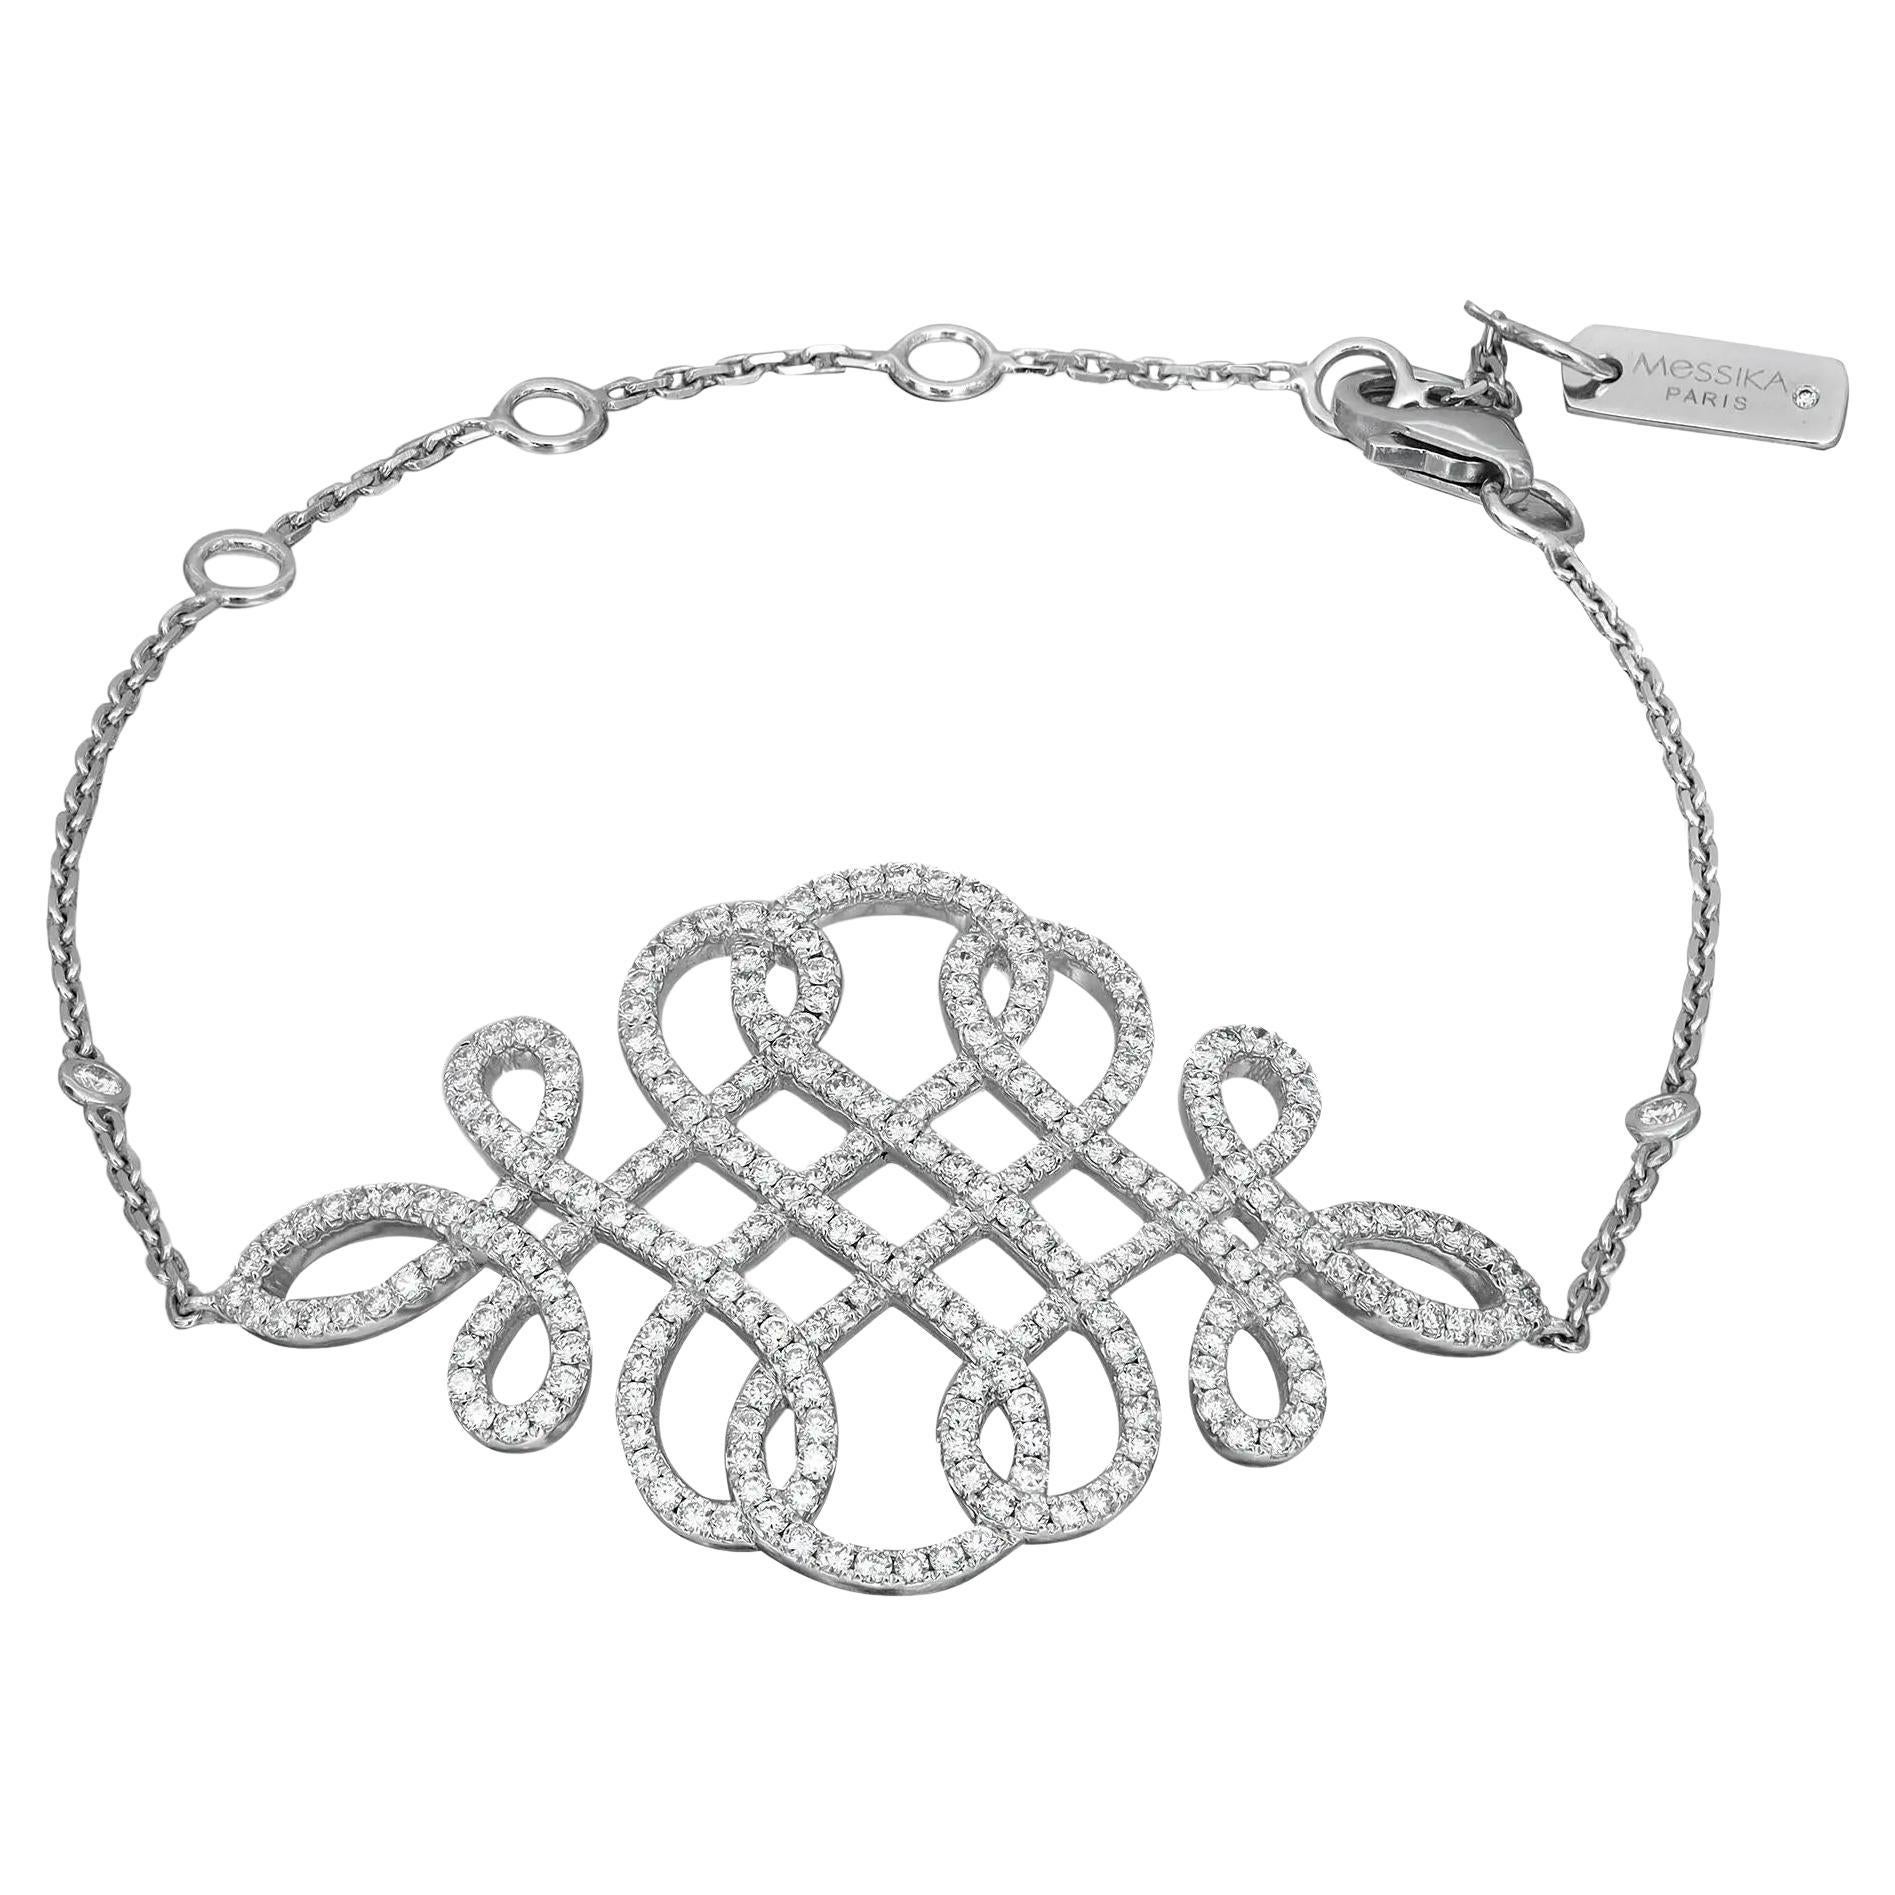 Messika 0.98Cttw Promess Diamond Chain Bracelet 18K White Gold 7 Inches For Sale